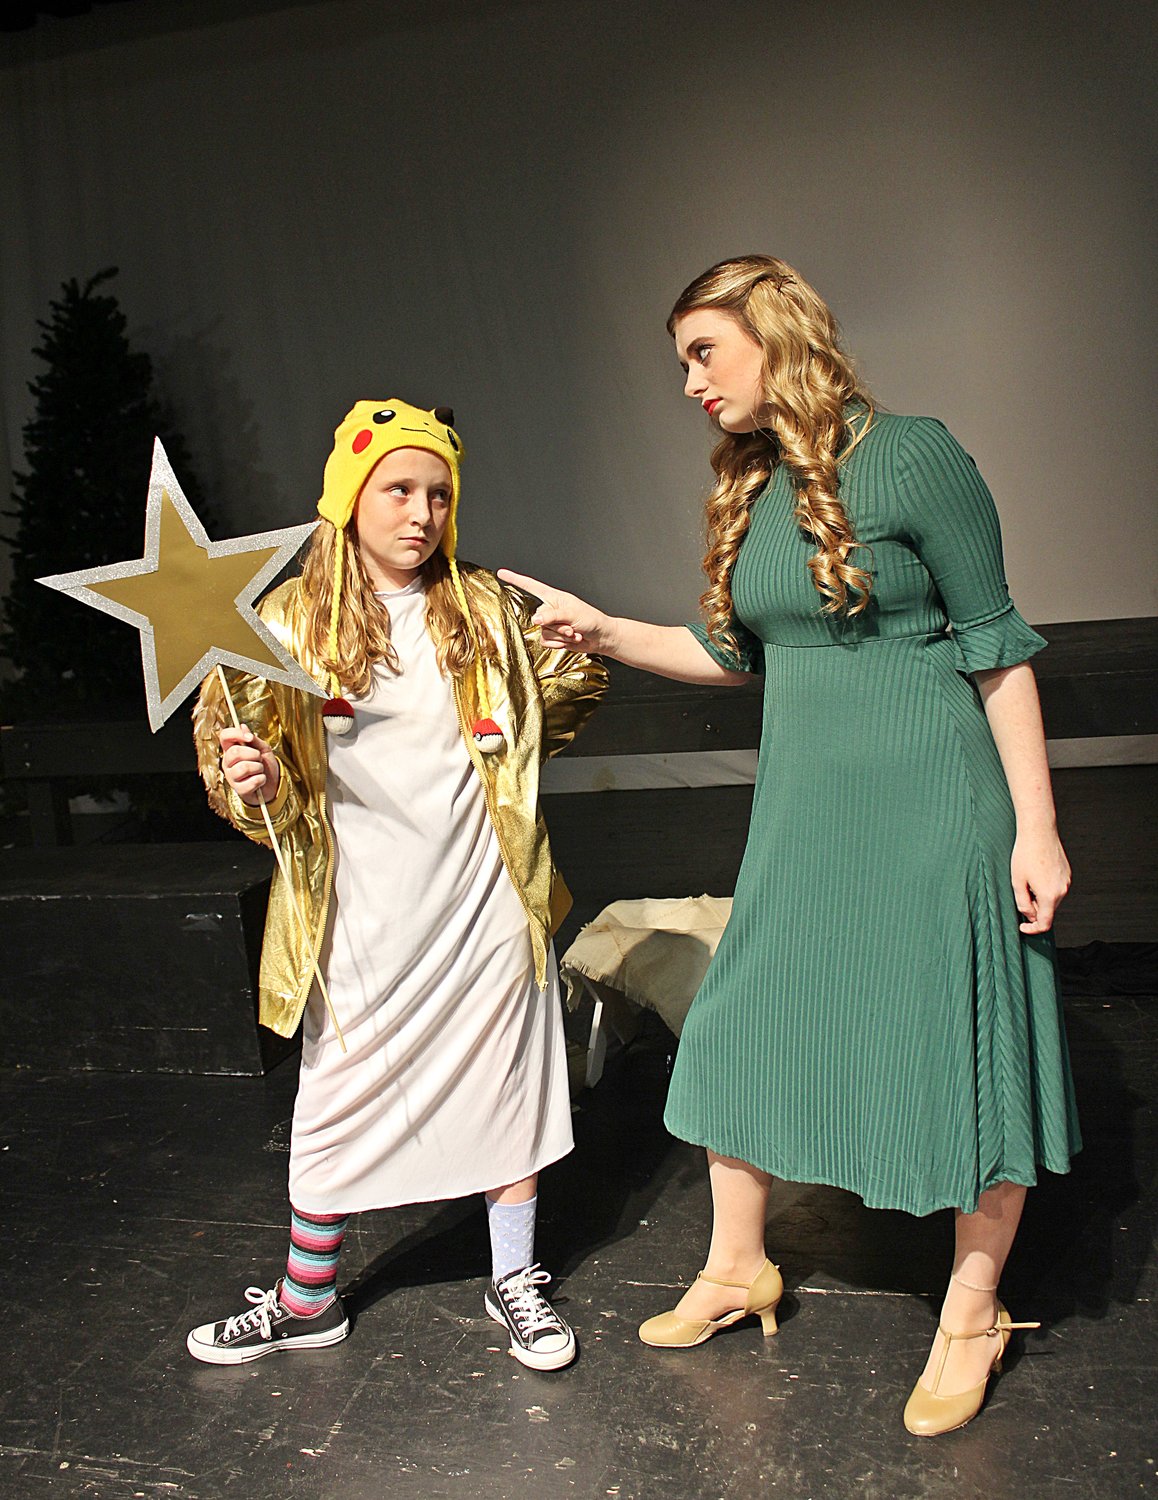 Gladys Herdman (Adelaide Kirk), left, is the meanest of the six Herman siblings that Grace Bradley (Katy Mayhan) has to deal with as director of “The Best Christmas Pageant Ever.”